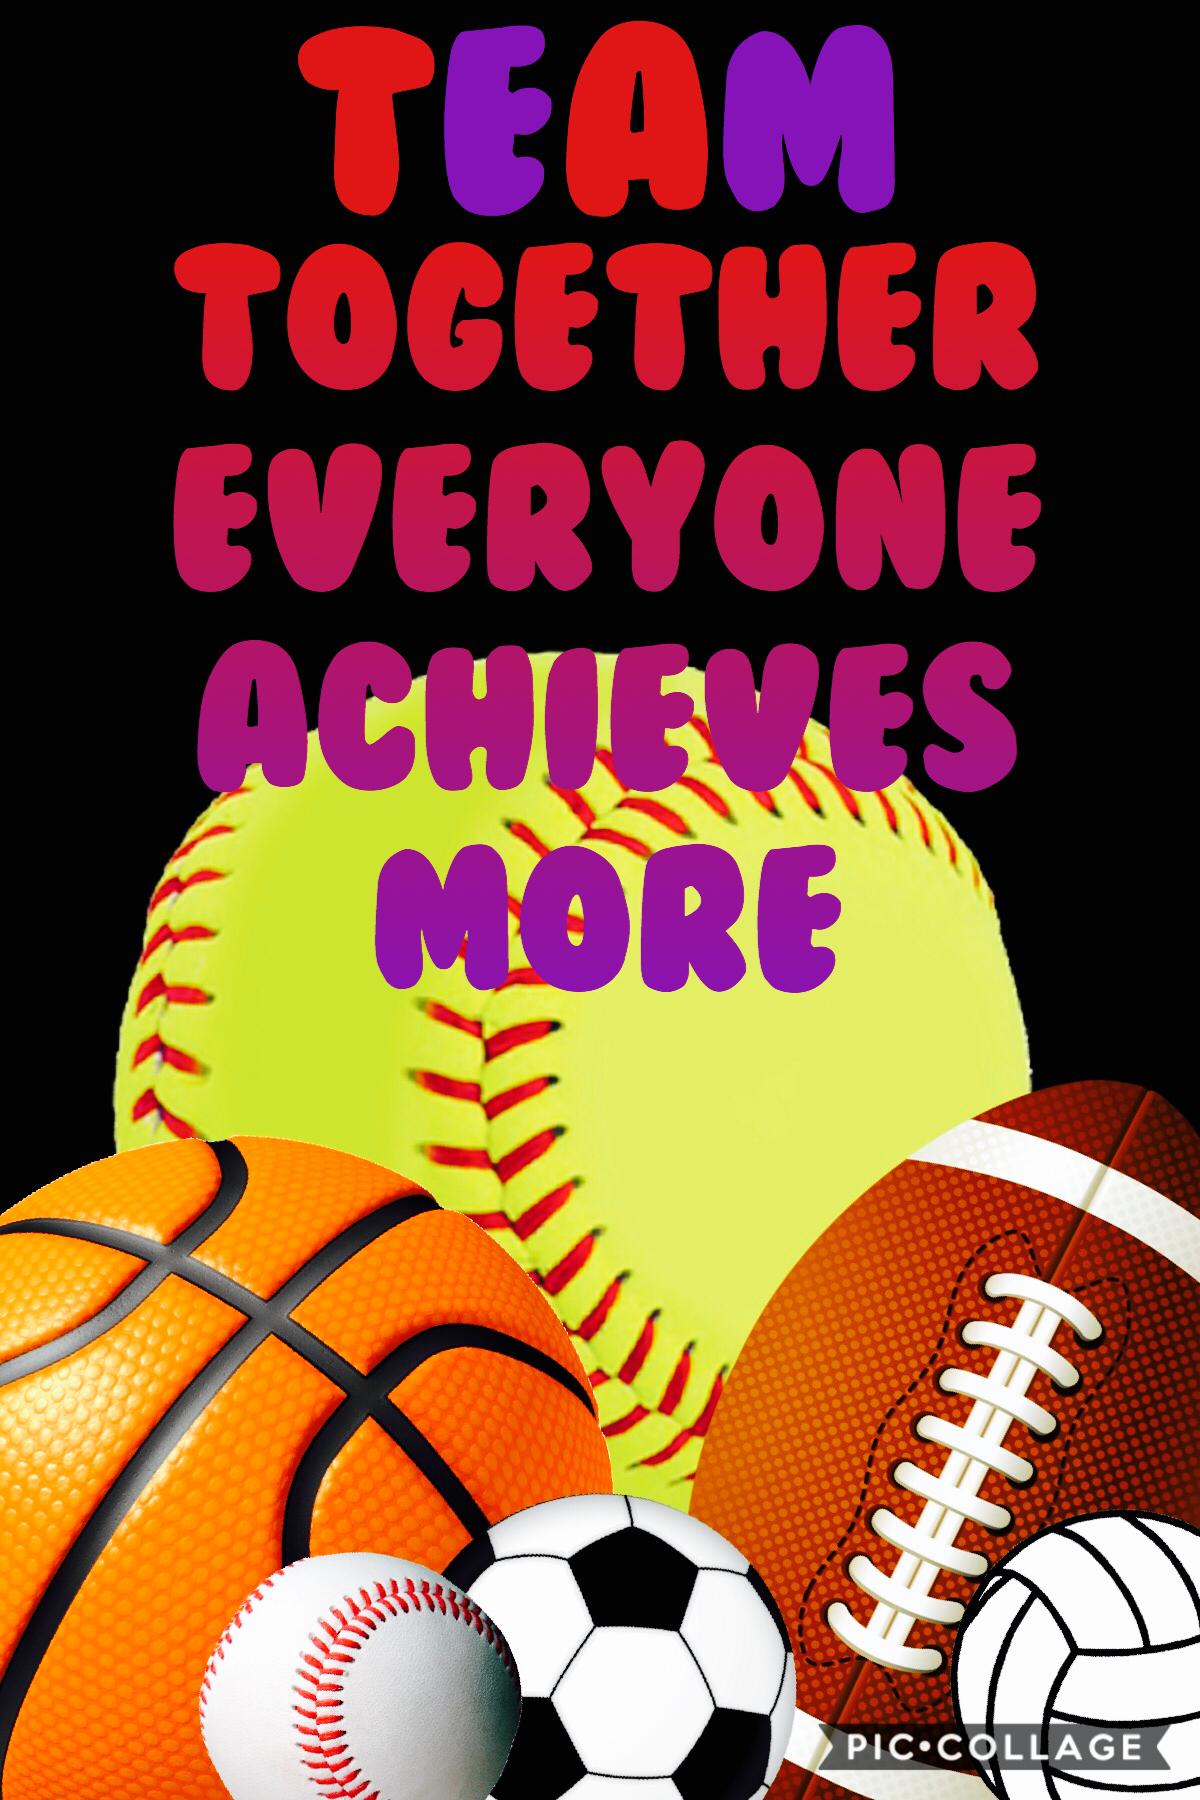 ⚾️🏀🏐TAP🥎⚽️🏈

This weeks theme will be sports, so i will post based on a different sport everyday!

If you comment below your interests or team colors, i could work them in and tag you in a post!

QOTD: Favorite Sport?

AOTD: Softball!

💙🥎@lauren_softball1